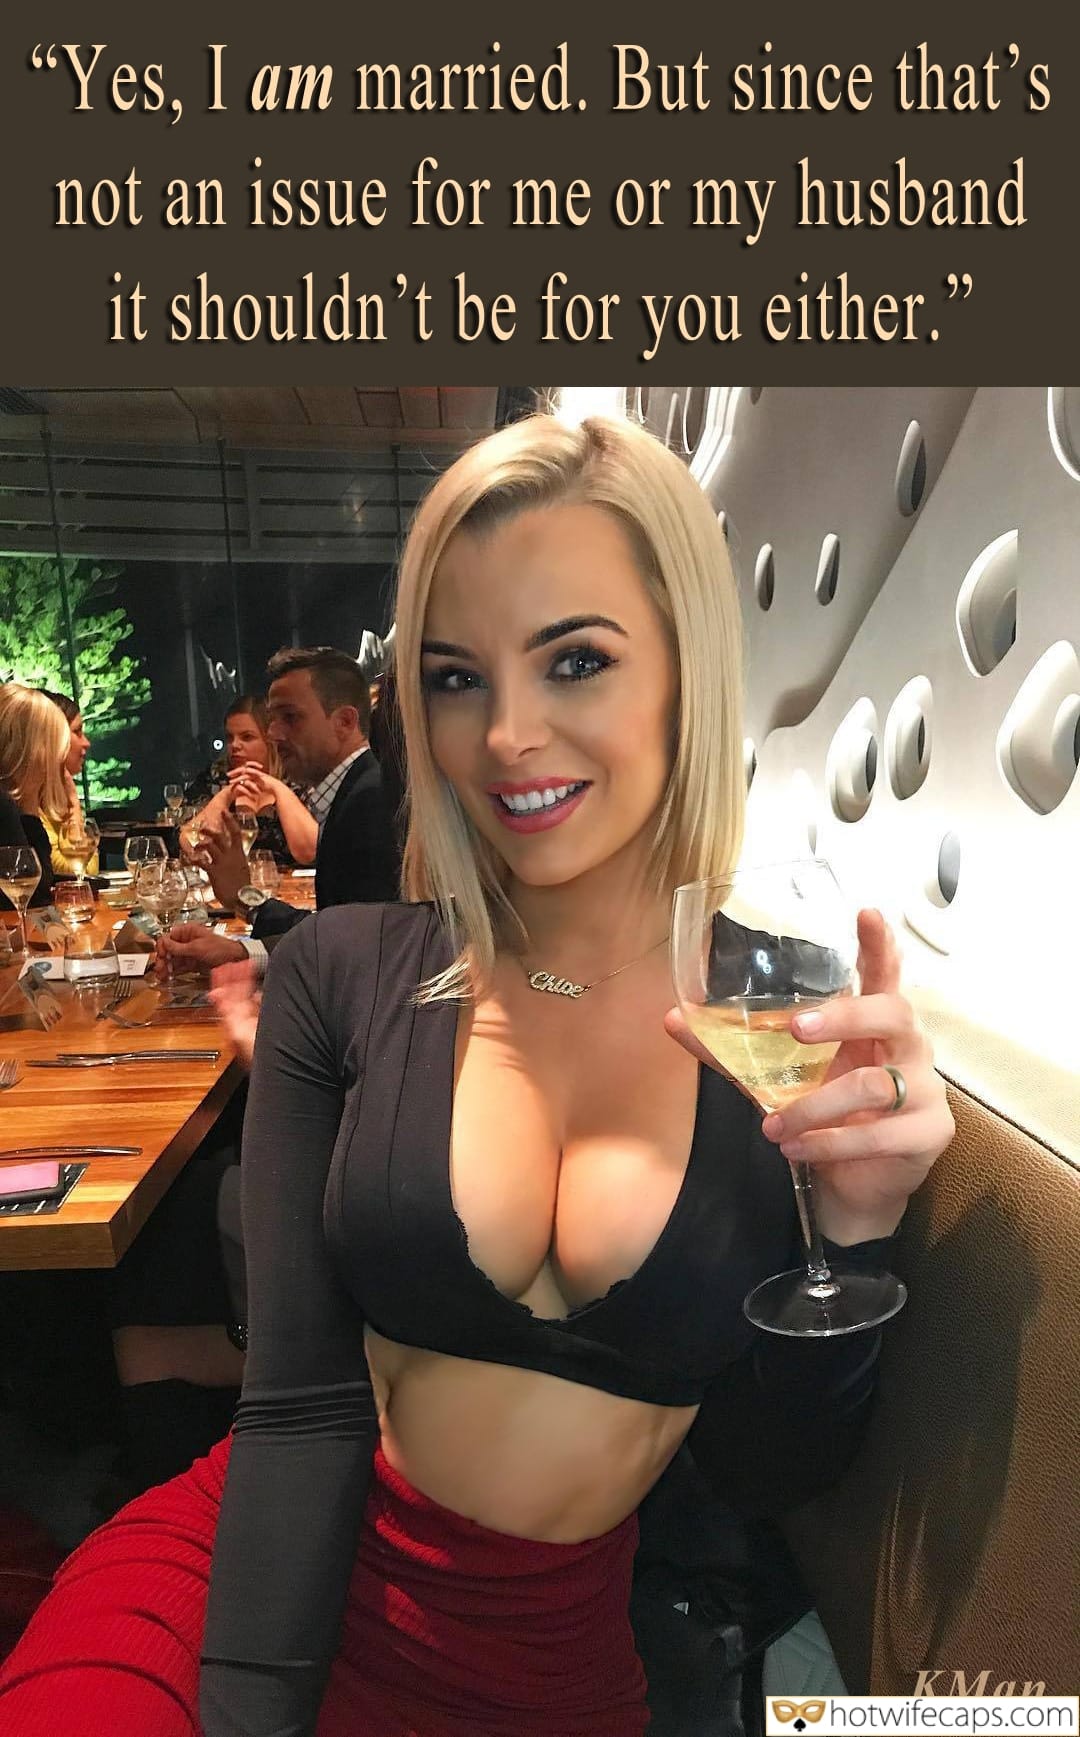 Sexy Memes Cuckold Cleanup Cheating Bully Bull Boss hotwife caption: “Yes, I am married. But since that’s not an issue for me or my husband it shouldn’t be for you either.” Sexy Wife Drinks a Lot